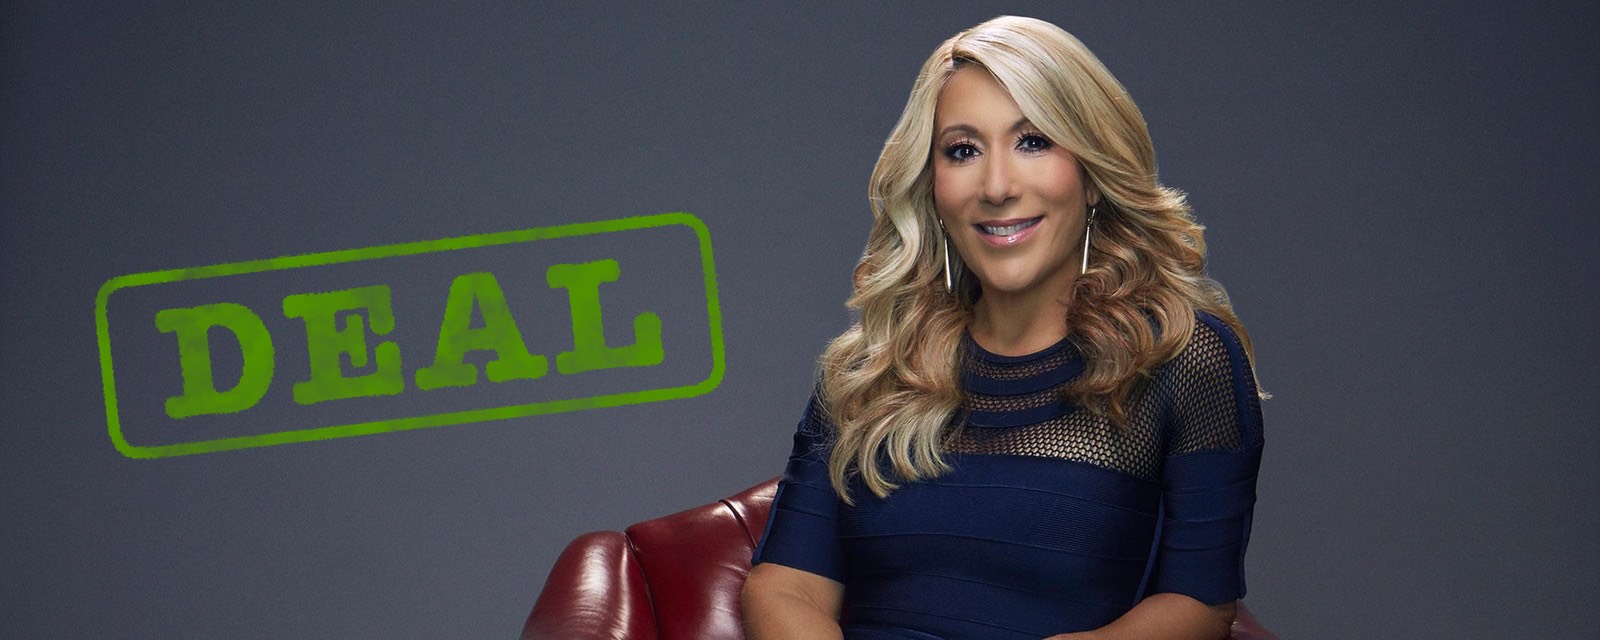 Shark Tank' Lori Greiner inks deal with SwiftPaws, a Melbourne startup